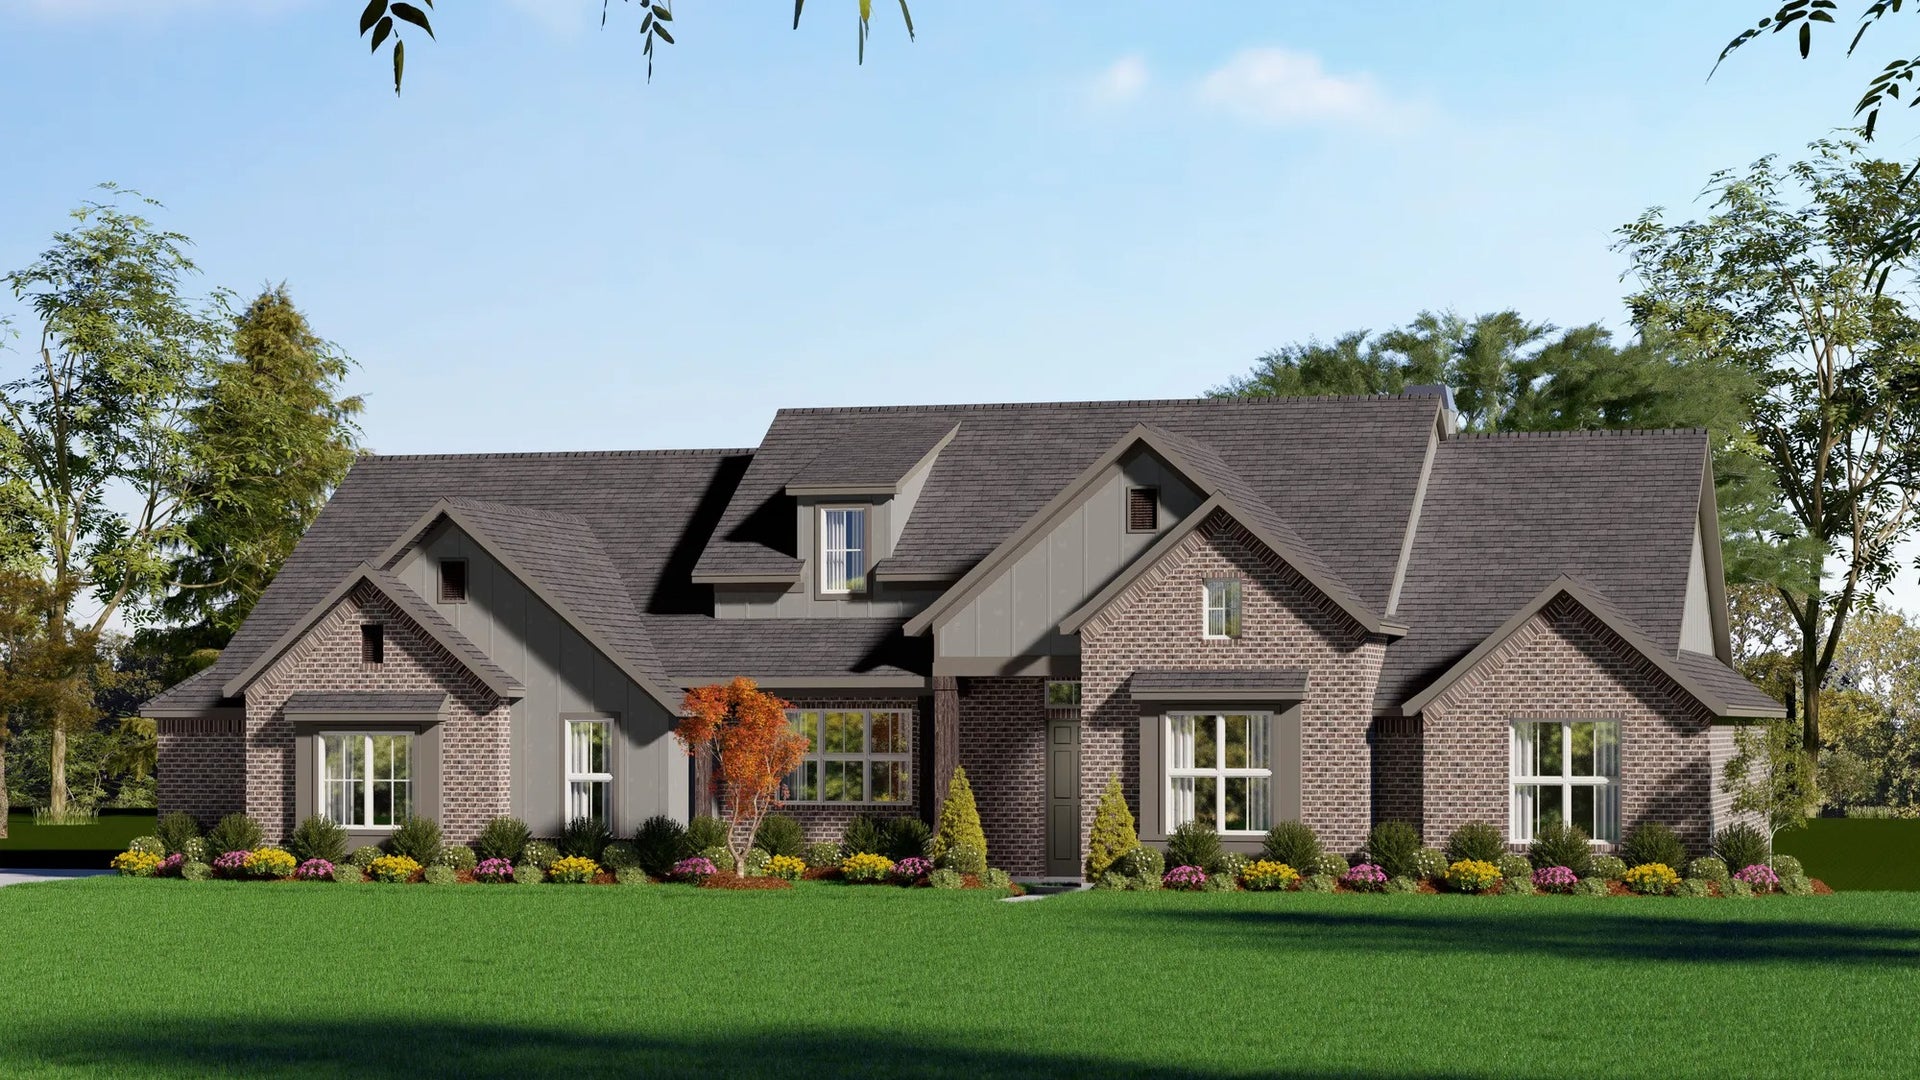 2797 C. Concept 2797 Home with 4 Bedrooms